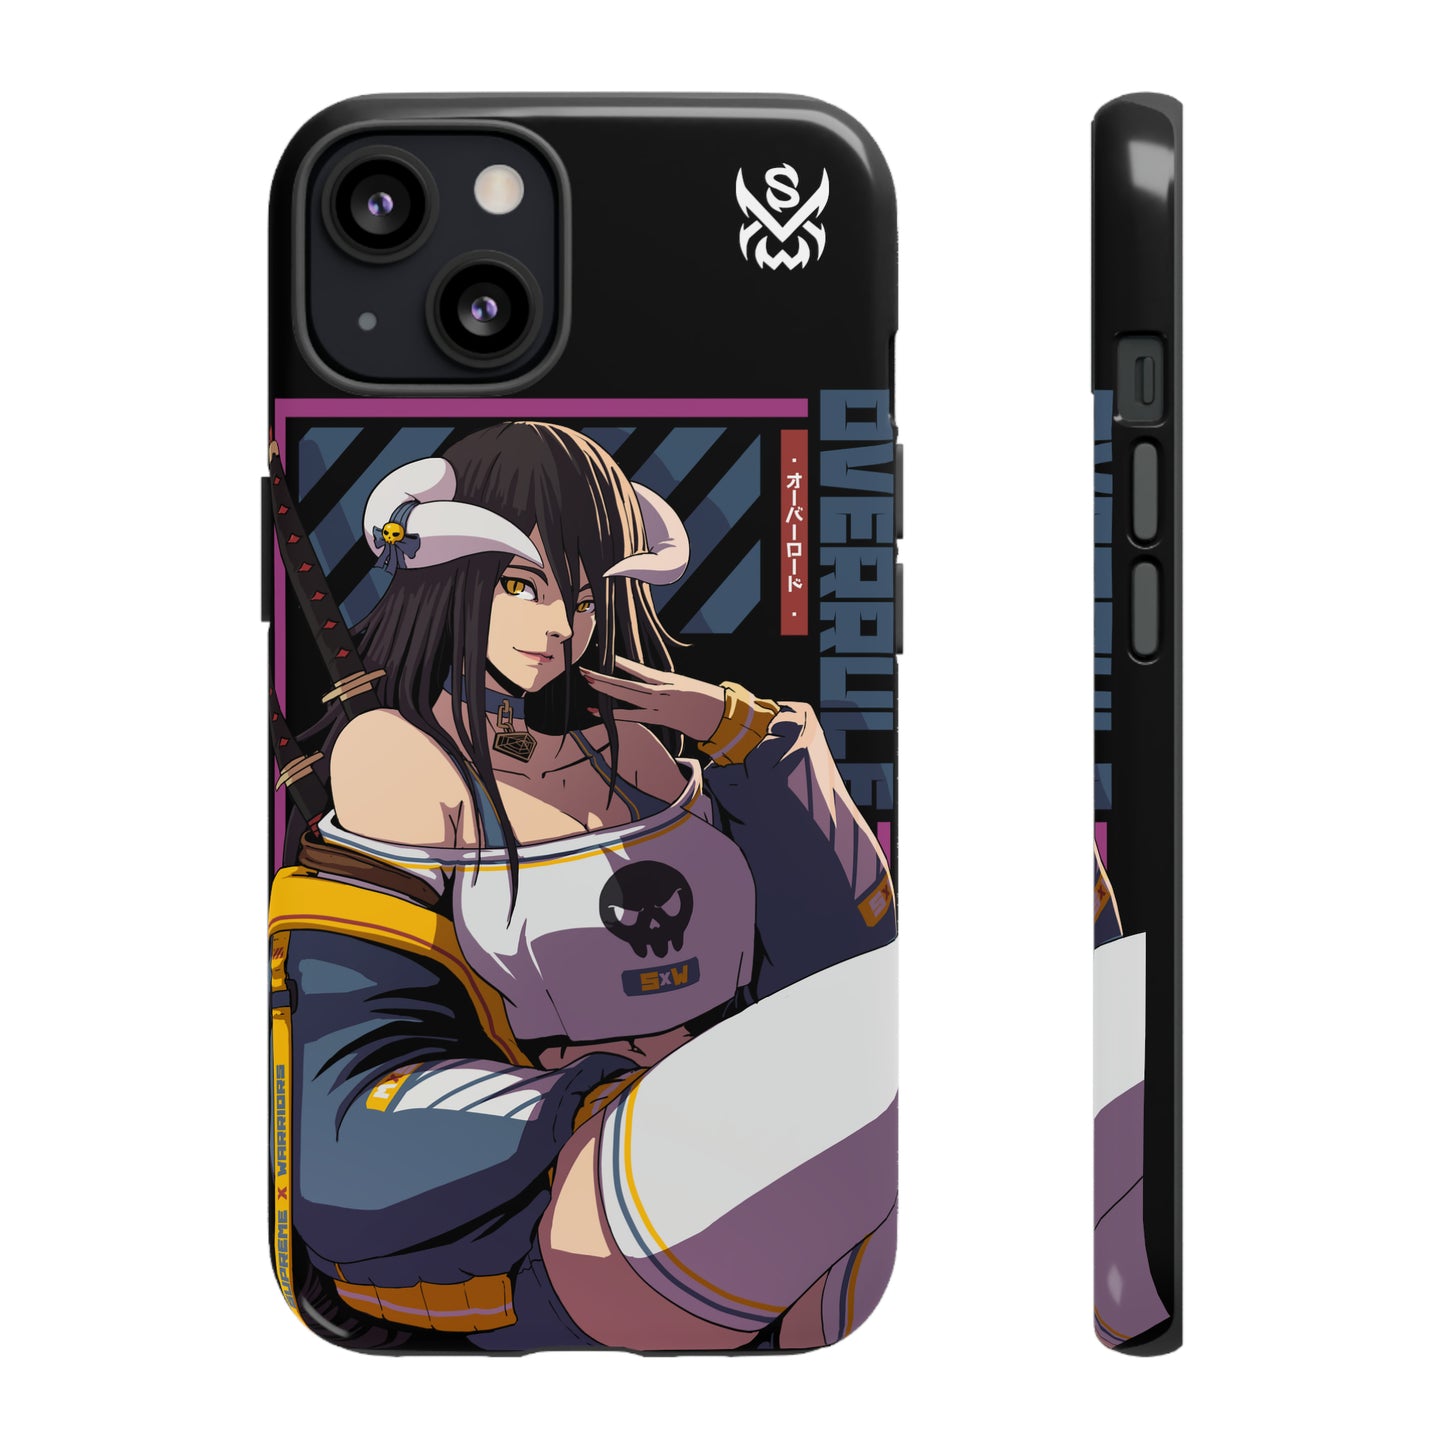 Overrule / iPhone Case - LIMITED